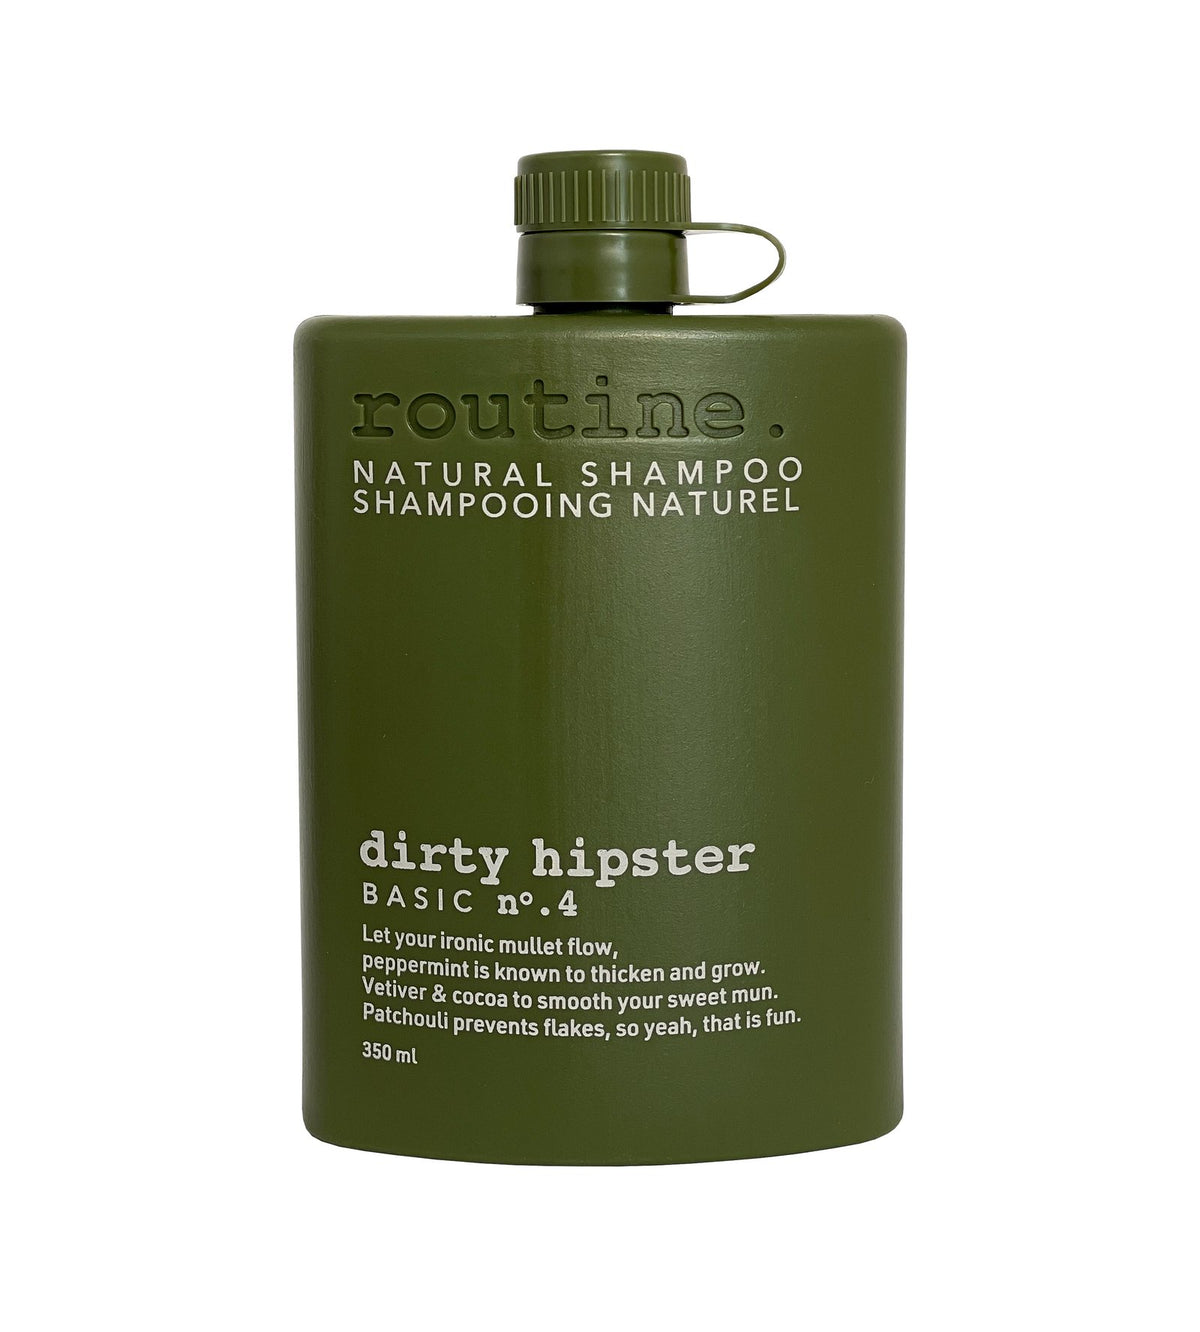 DIRTY HIPSTER BASIC NO. 4 SHAMPOO 350 ML - Routine Goods